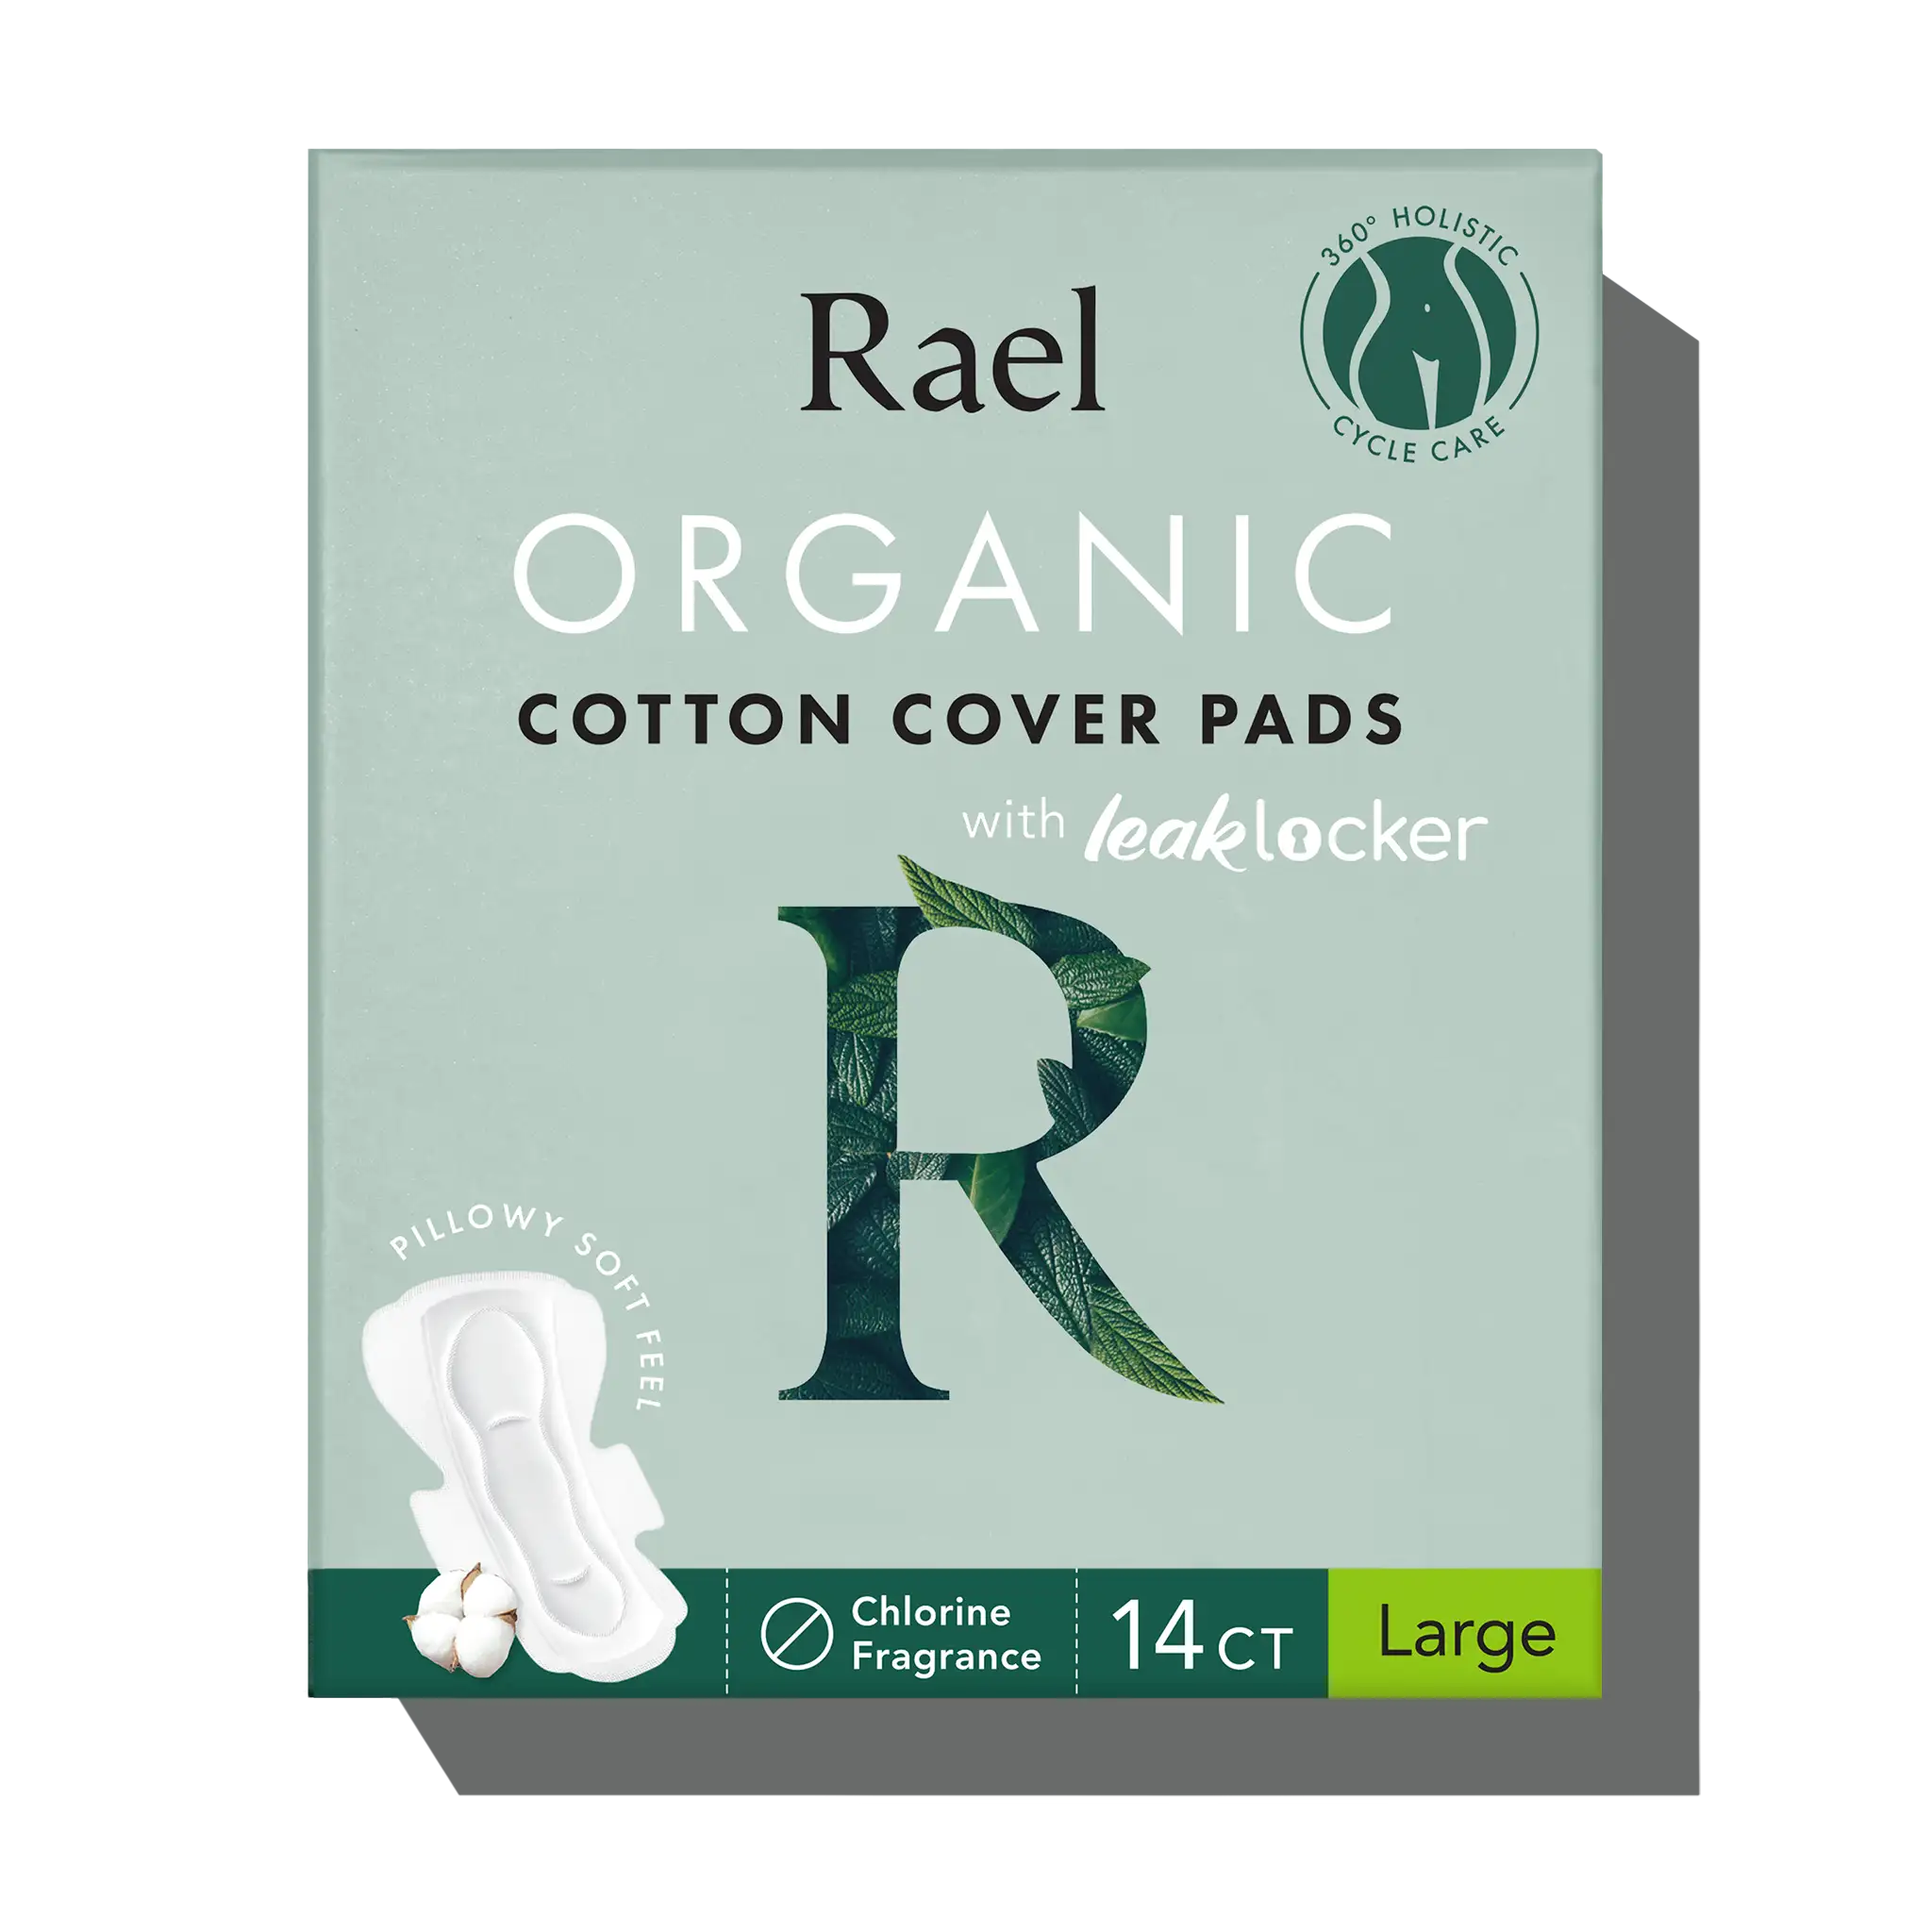 Eco-Friendly Period Care  Organic Cotton Pads, Liners & Tampons